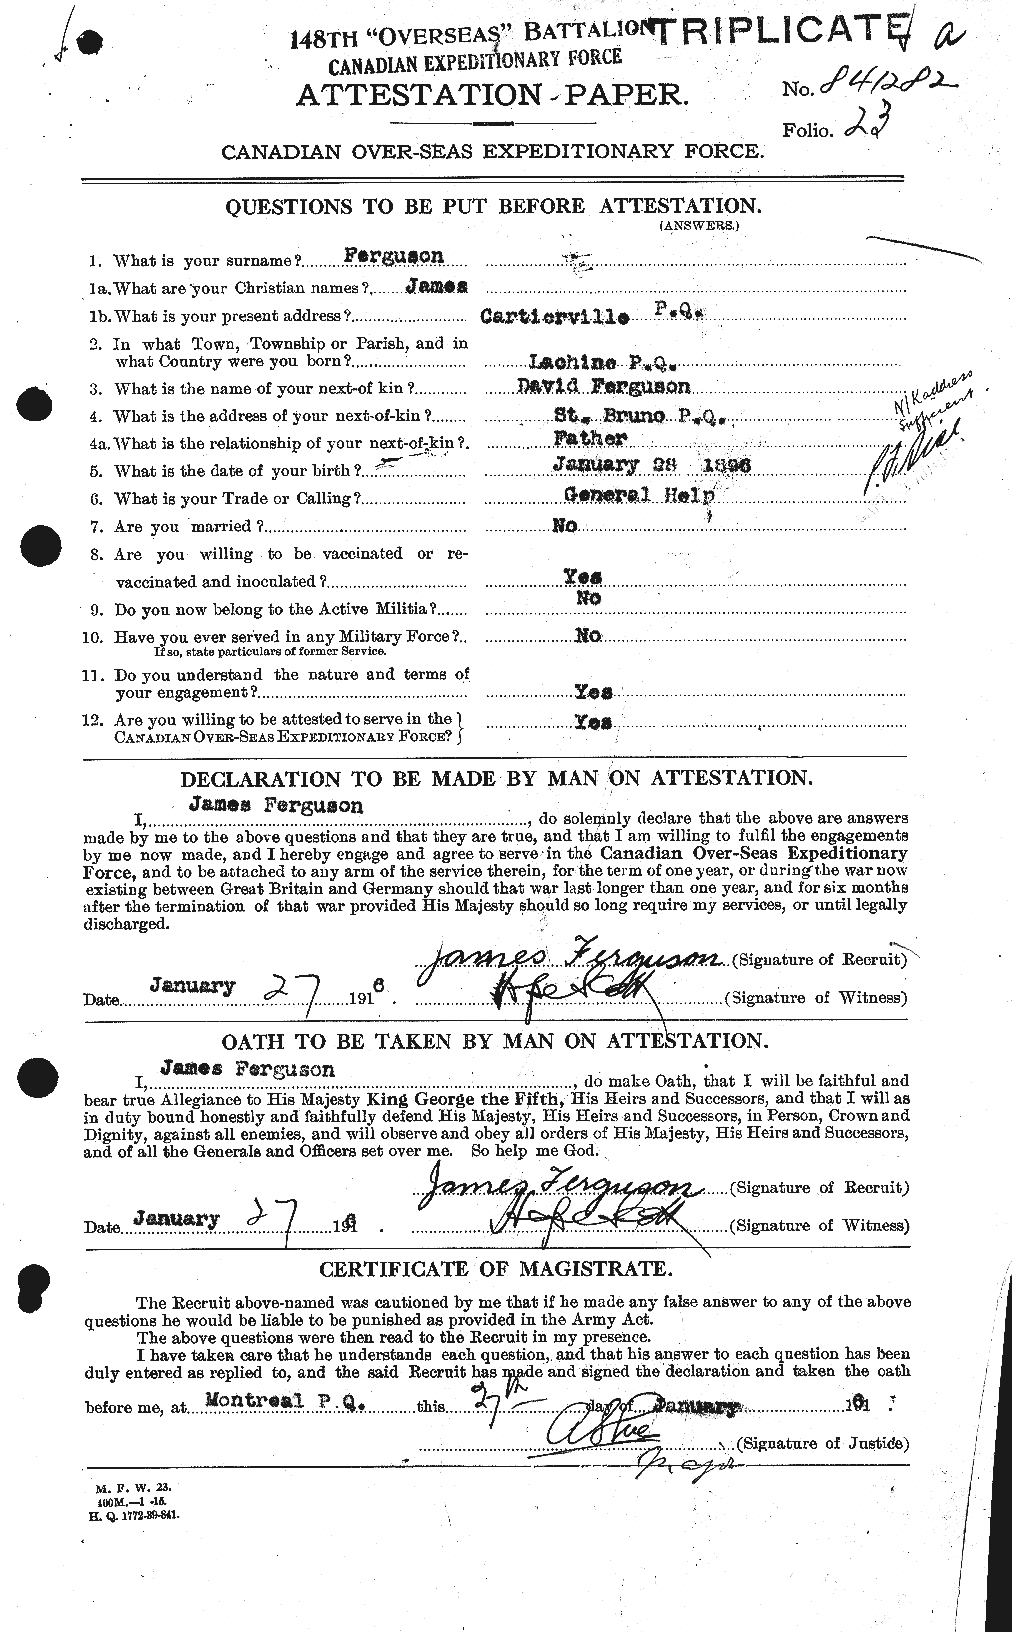 Personnel Records of the First World War - CEF 320226a